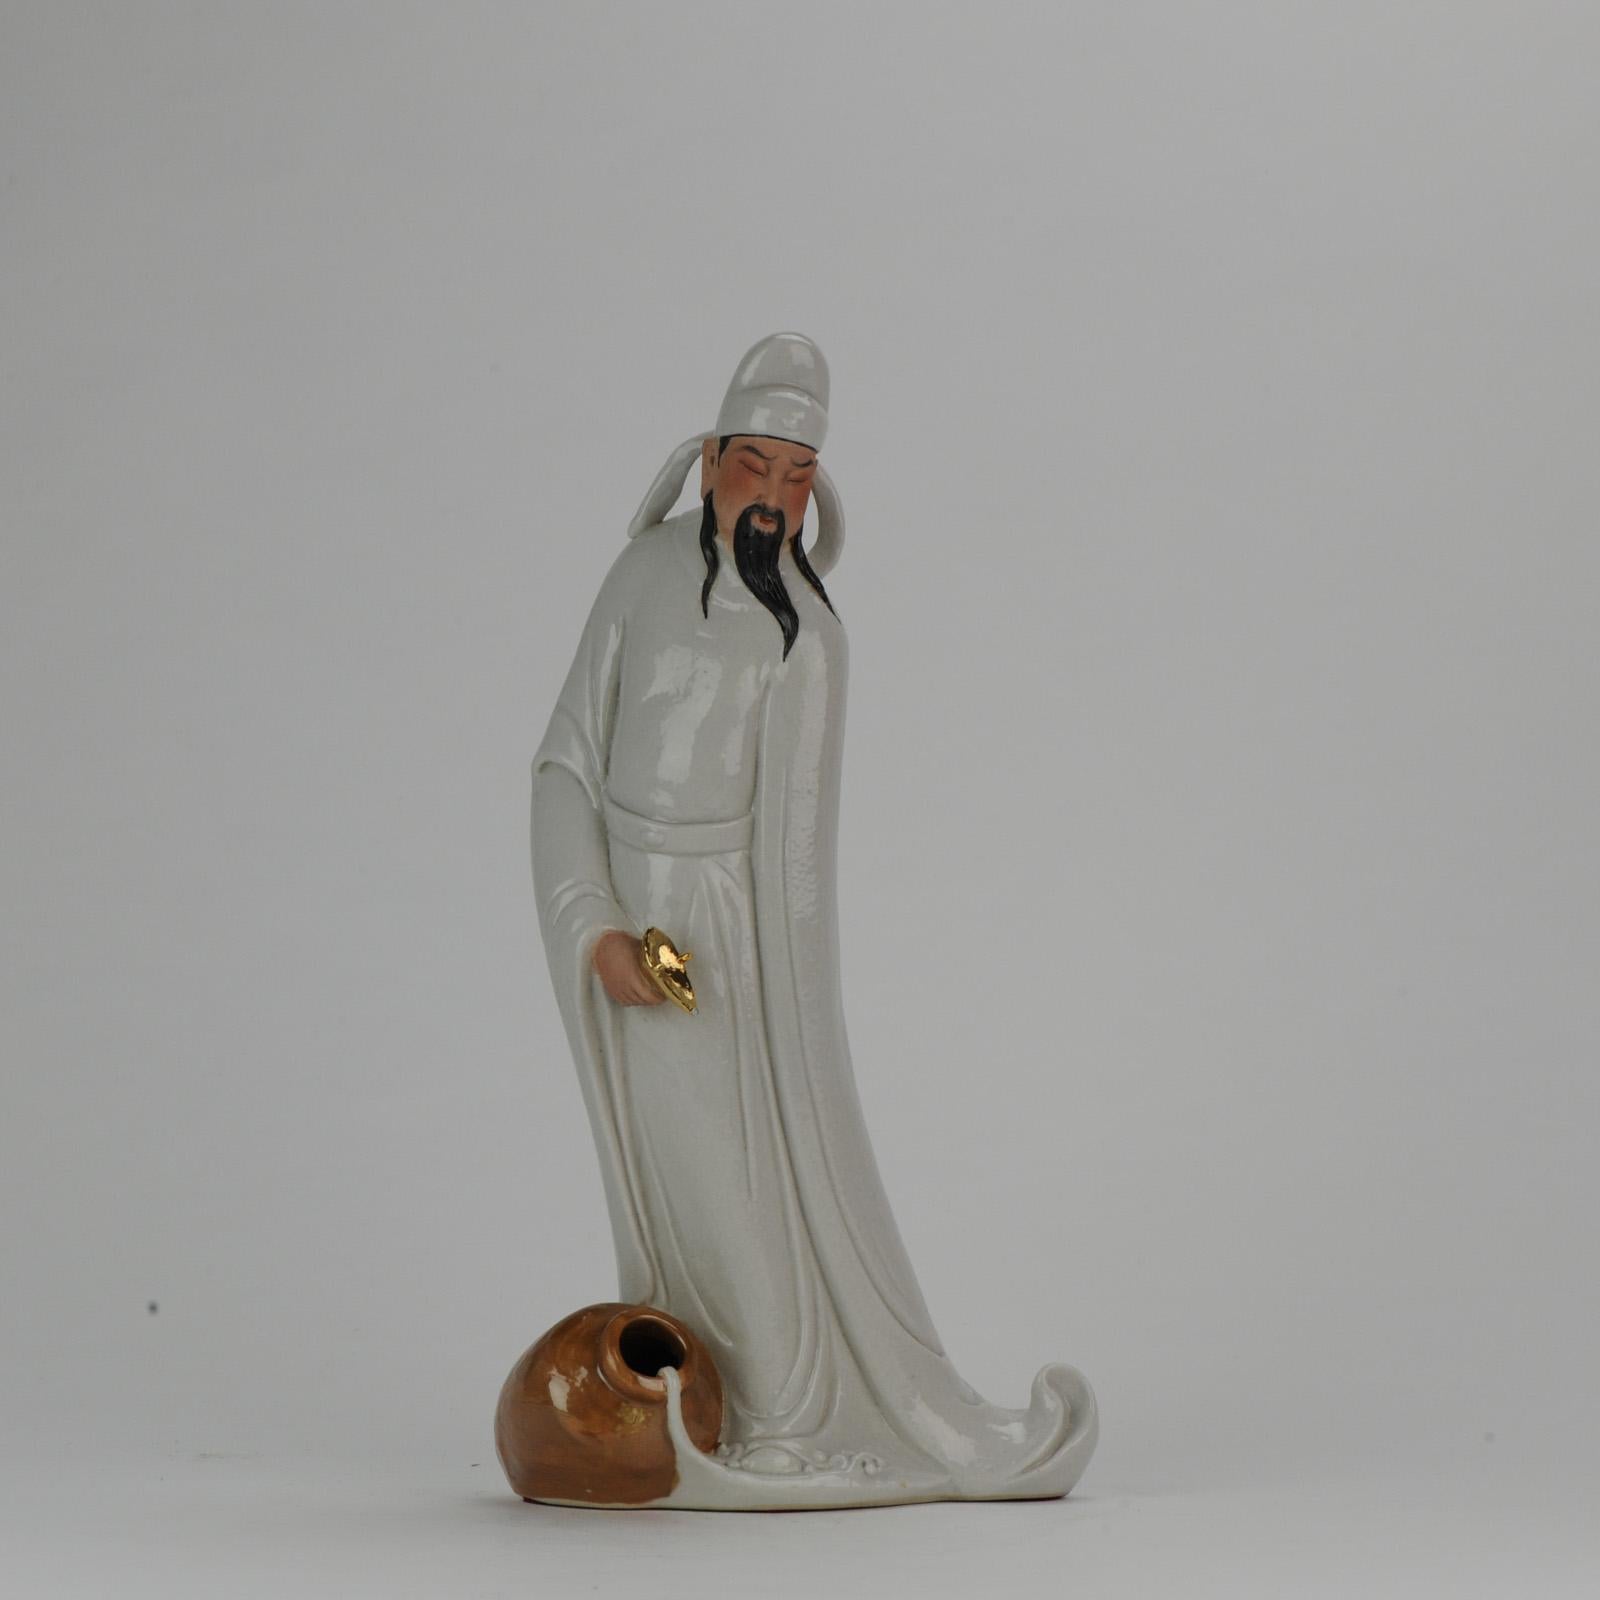 Chinese Porcelain Sculpture Man Holding Ritual Vessel, Dated 1998, Wang Qiang For Sale 5